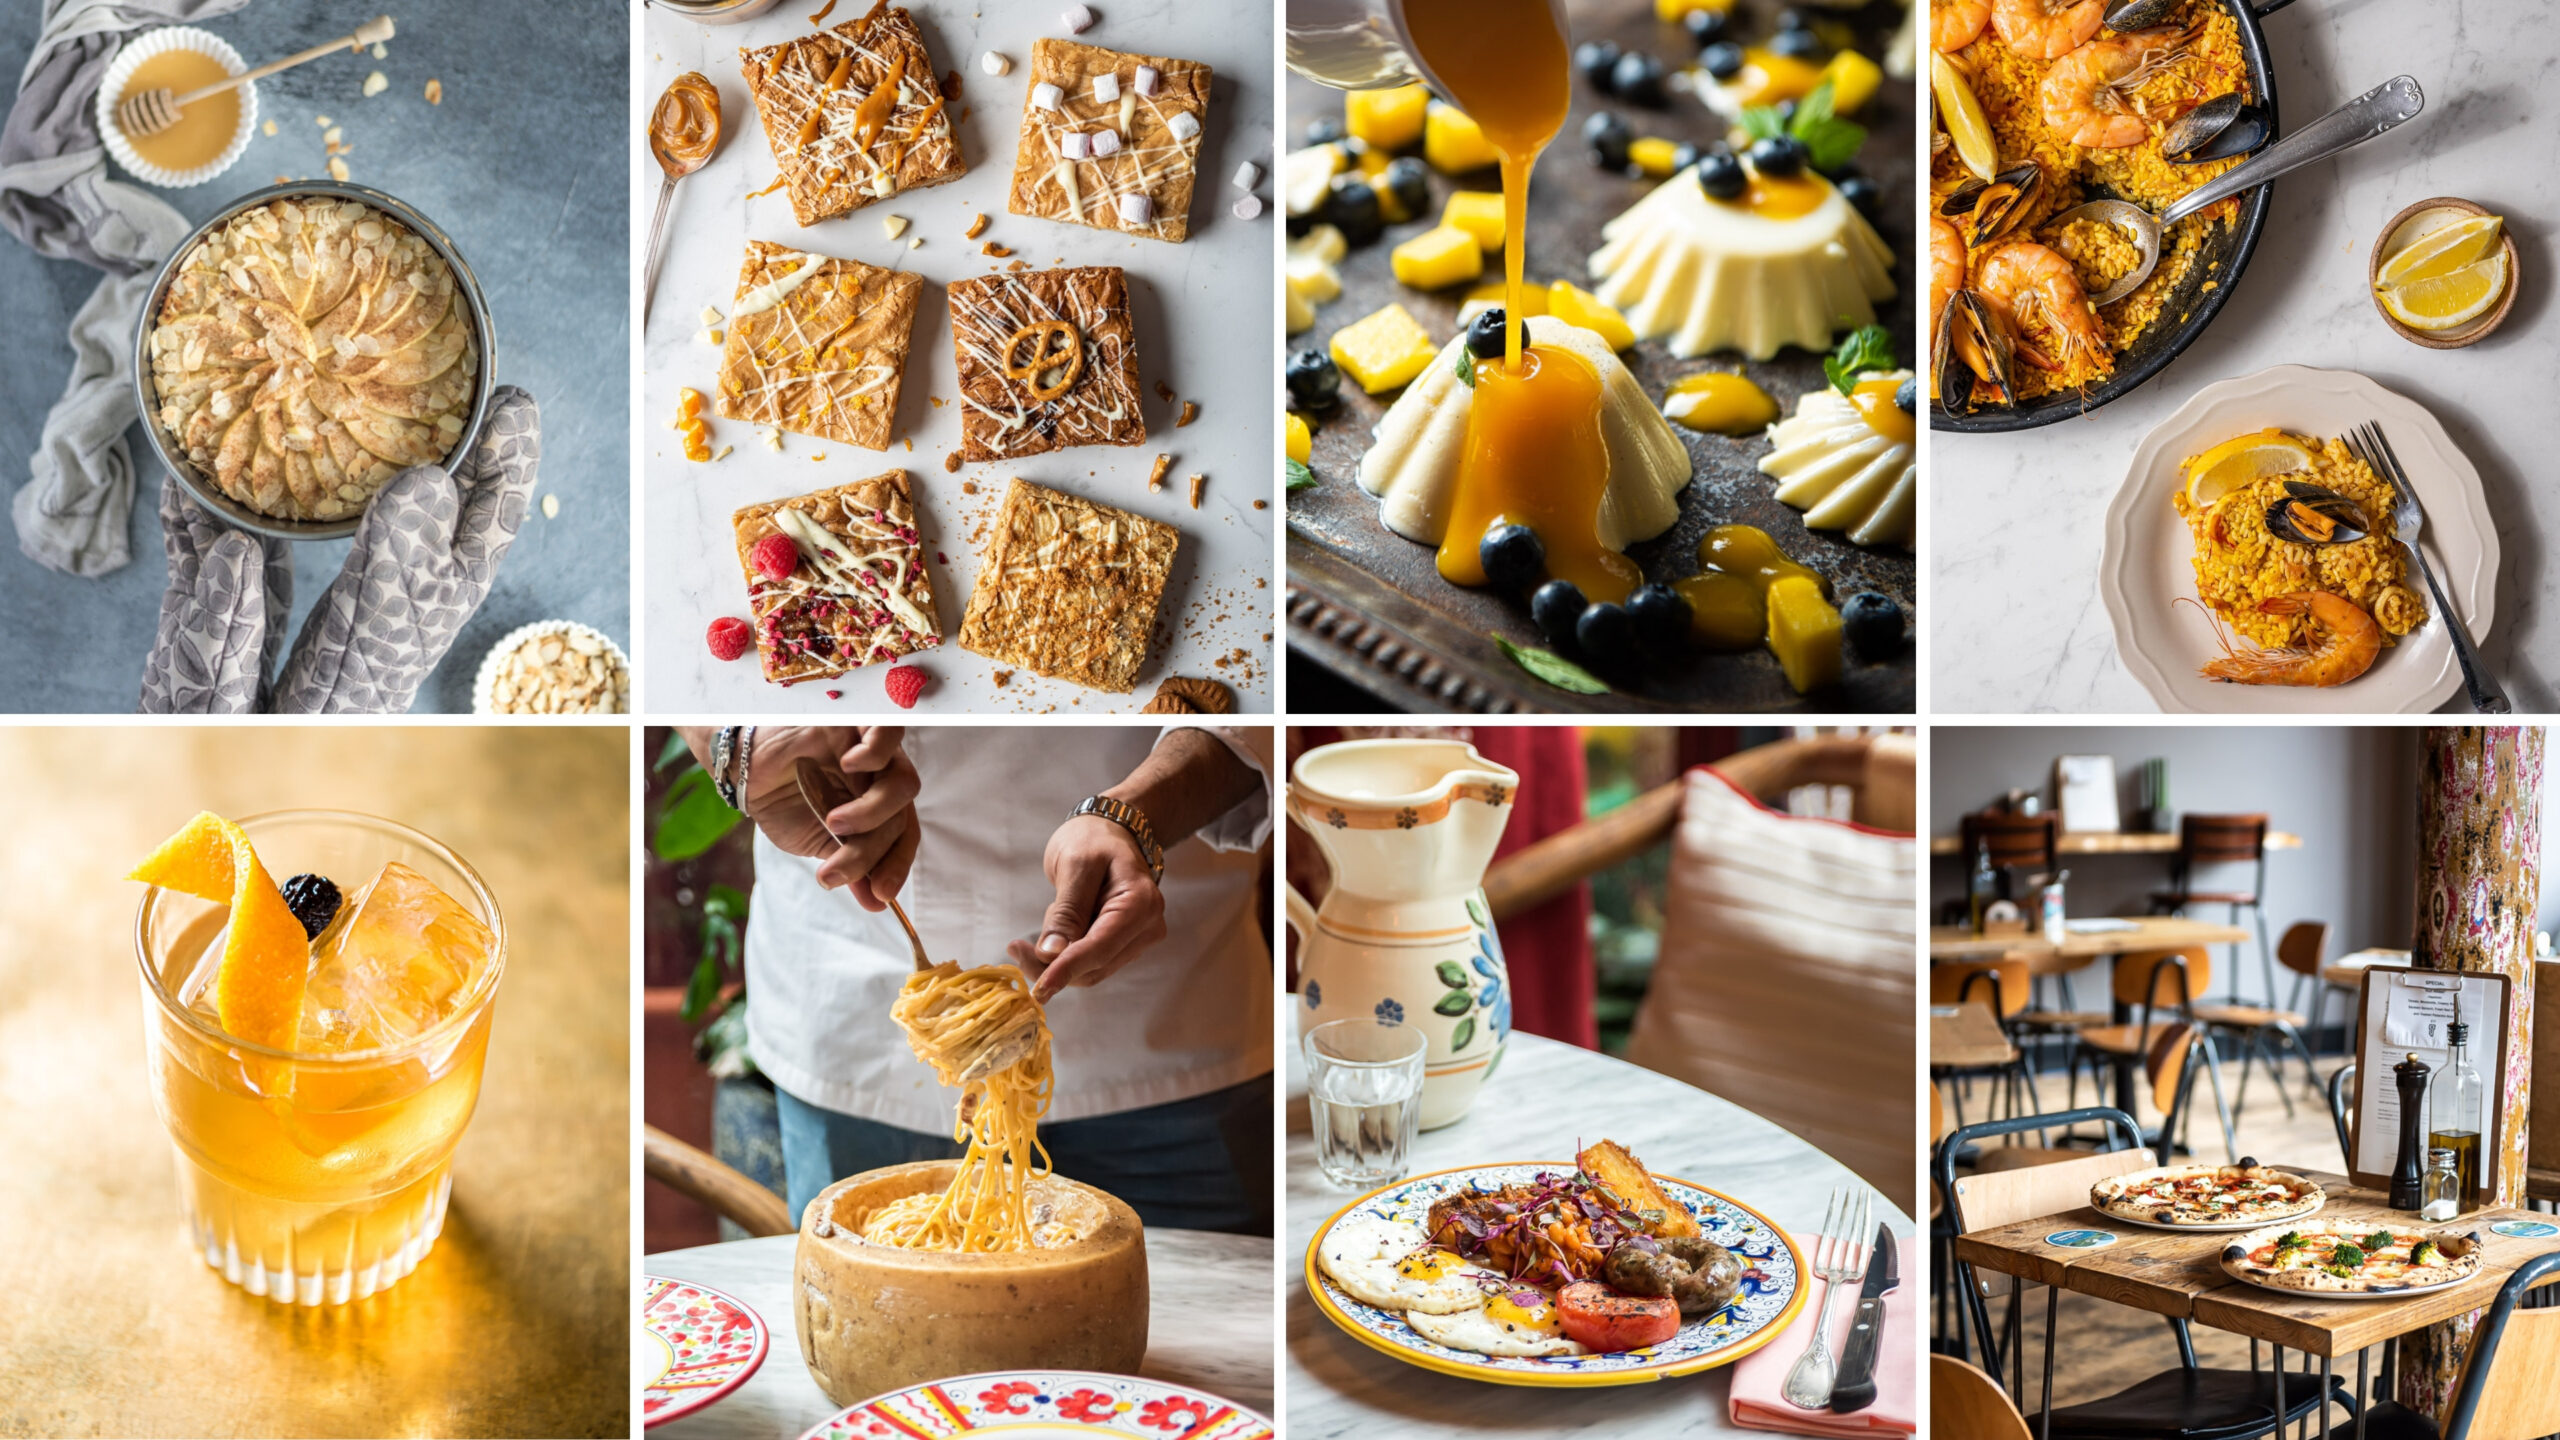 food photography portfolio tips, how to attract your dream food photography clients